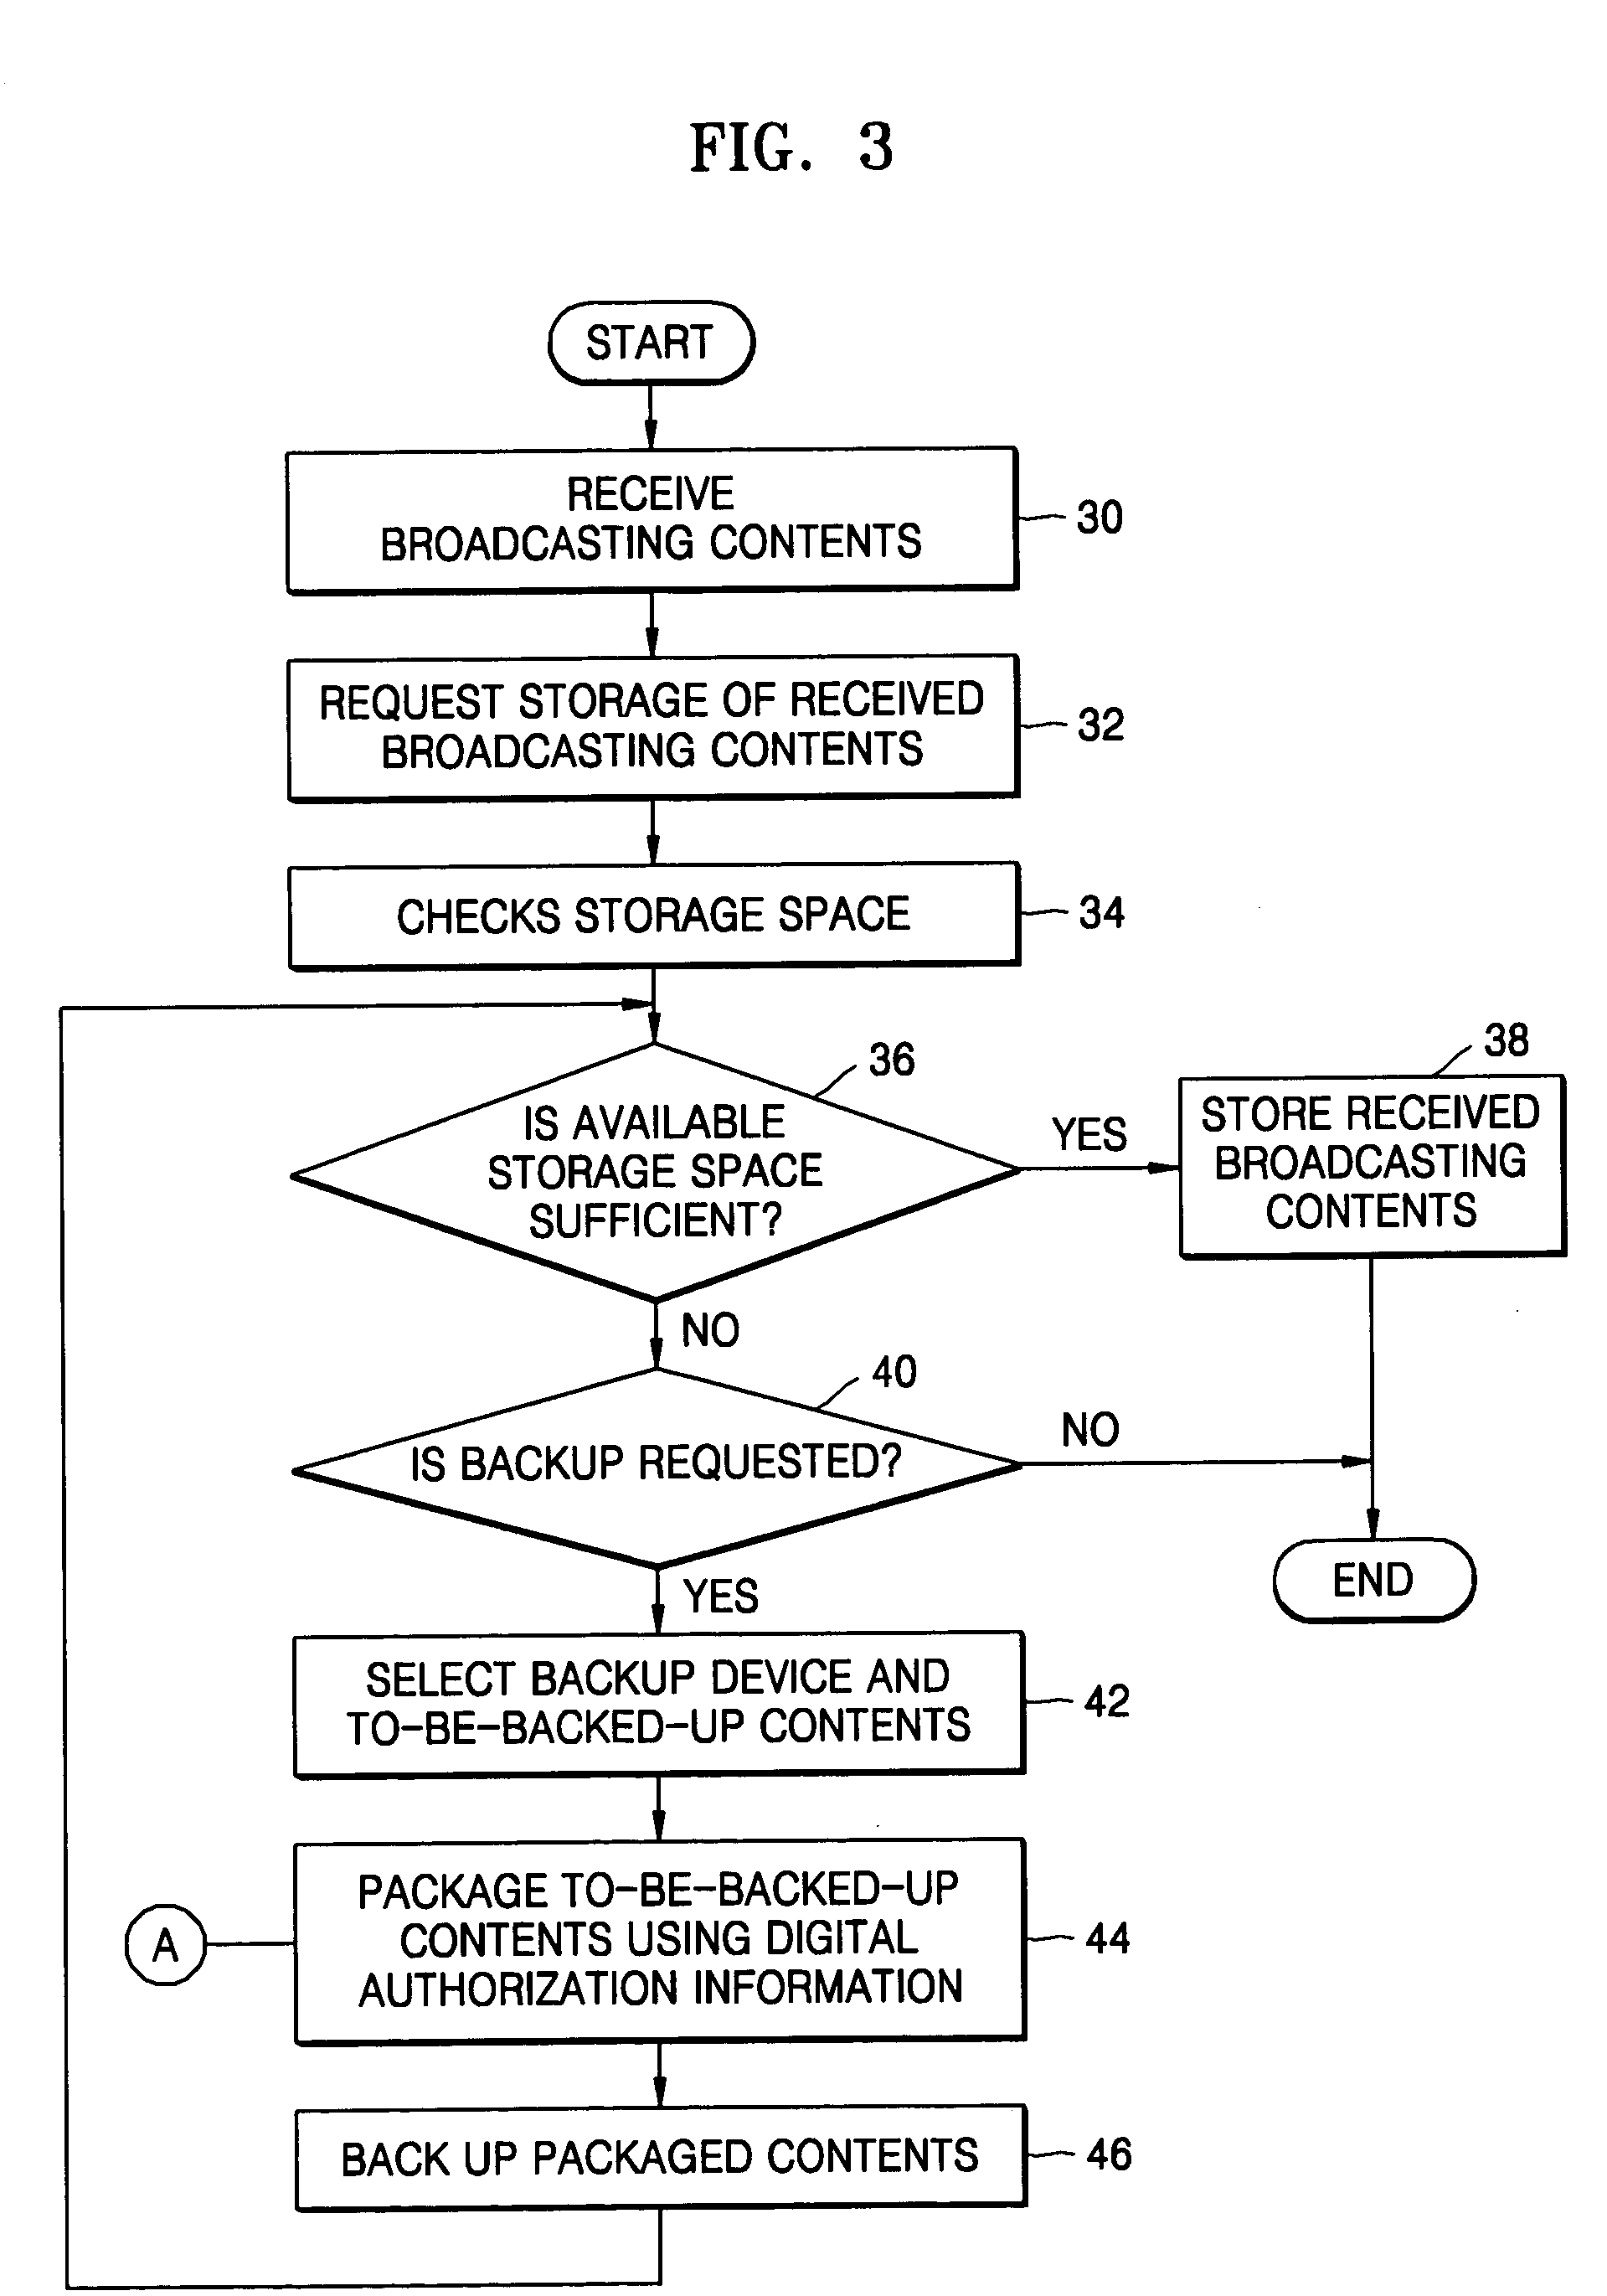 Multi-media device having function of backing up broadcasting contents in home network environment and method of backing up the broadcasting contents